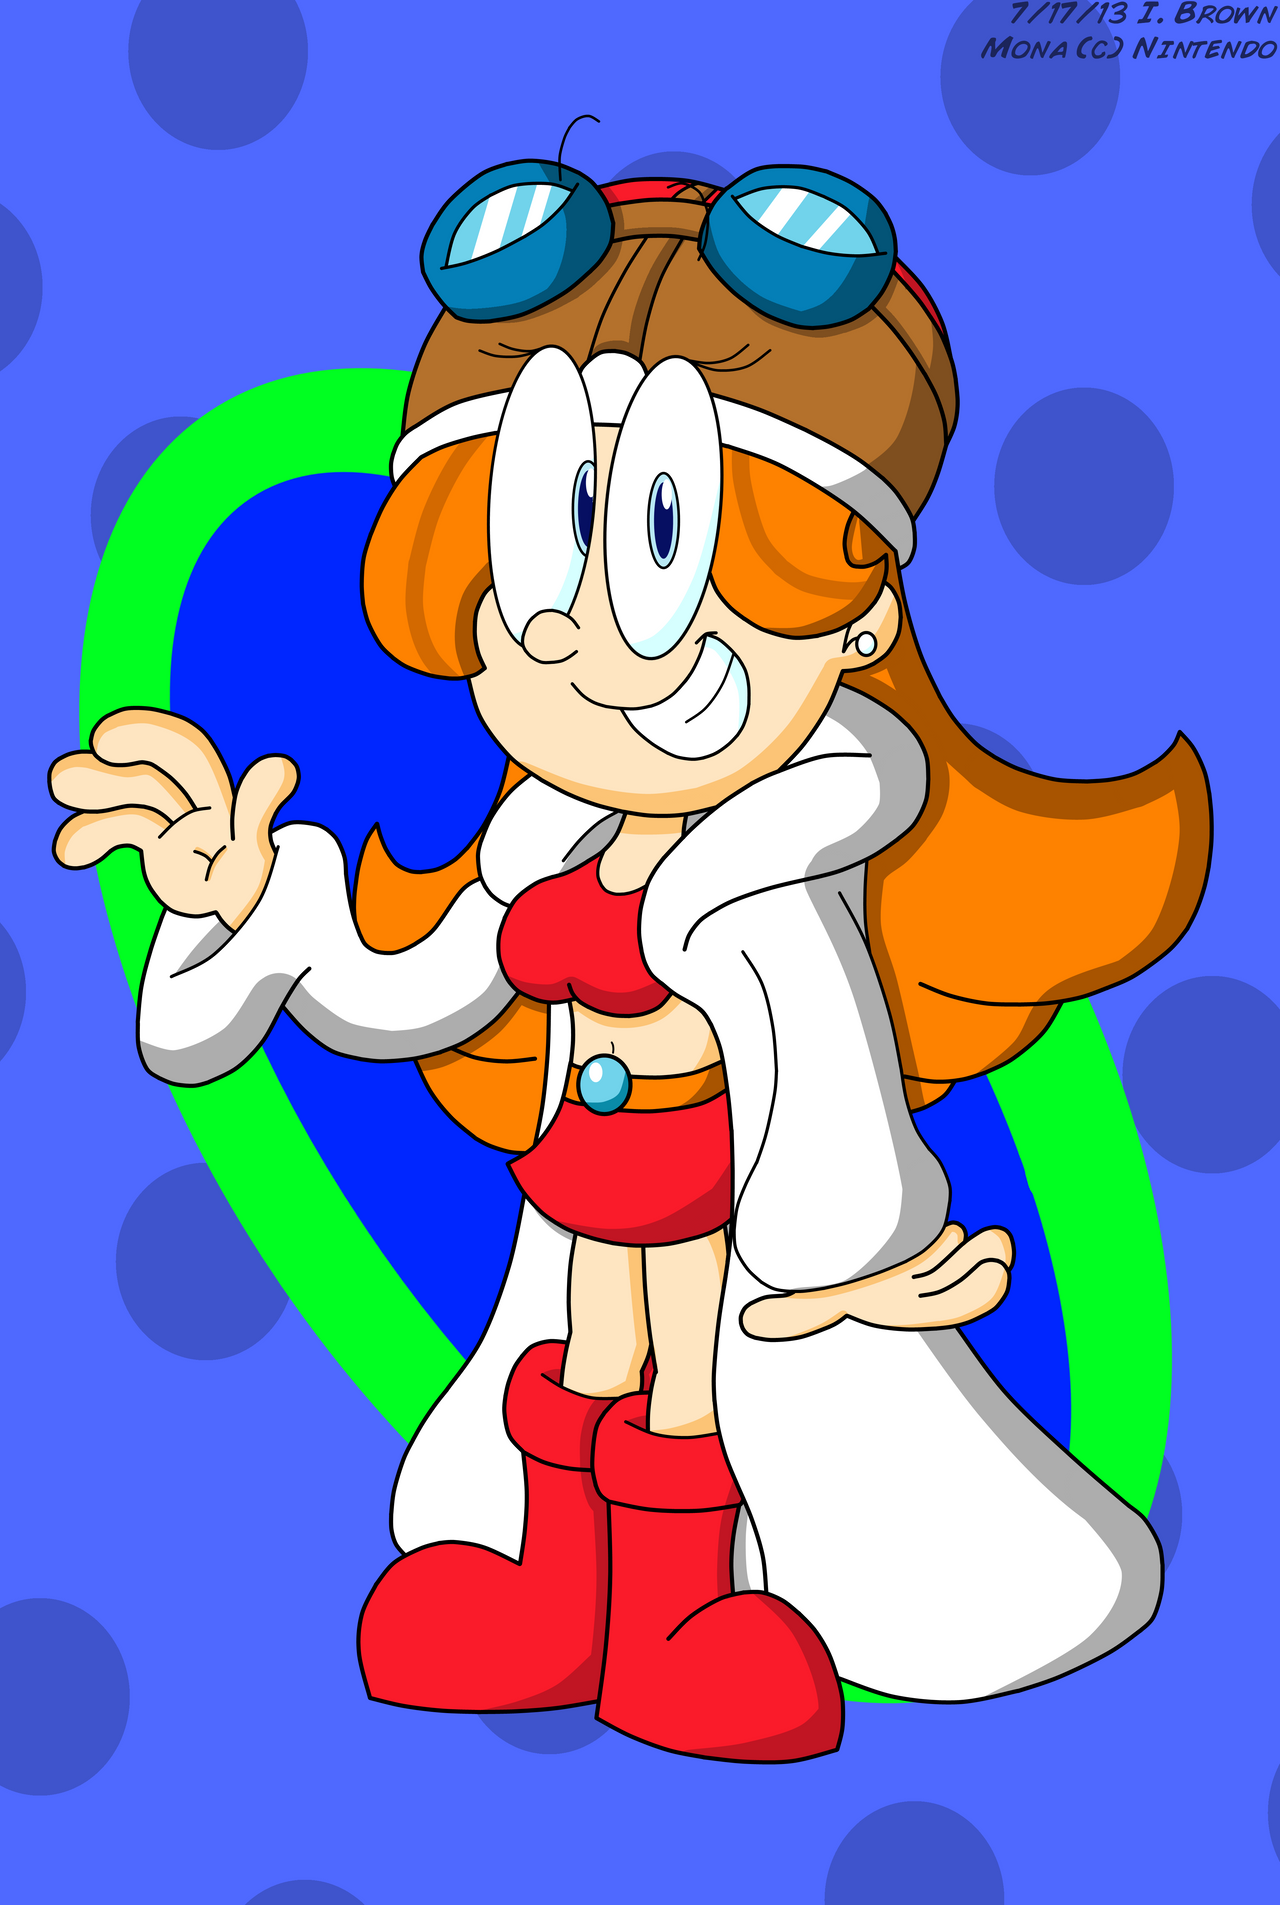 warioware___mona_by_luigistar445_d6dxw8l-fullview.png